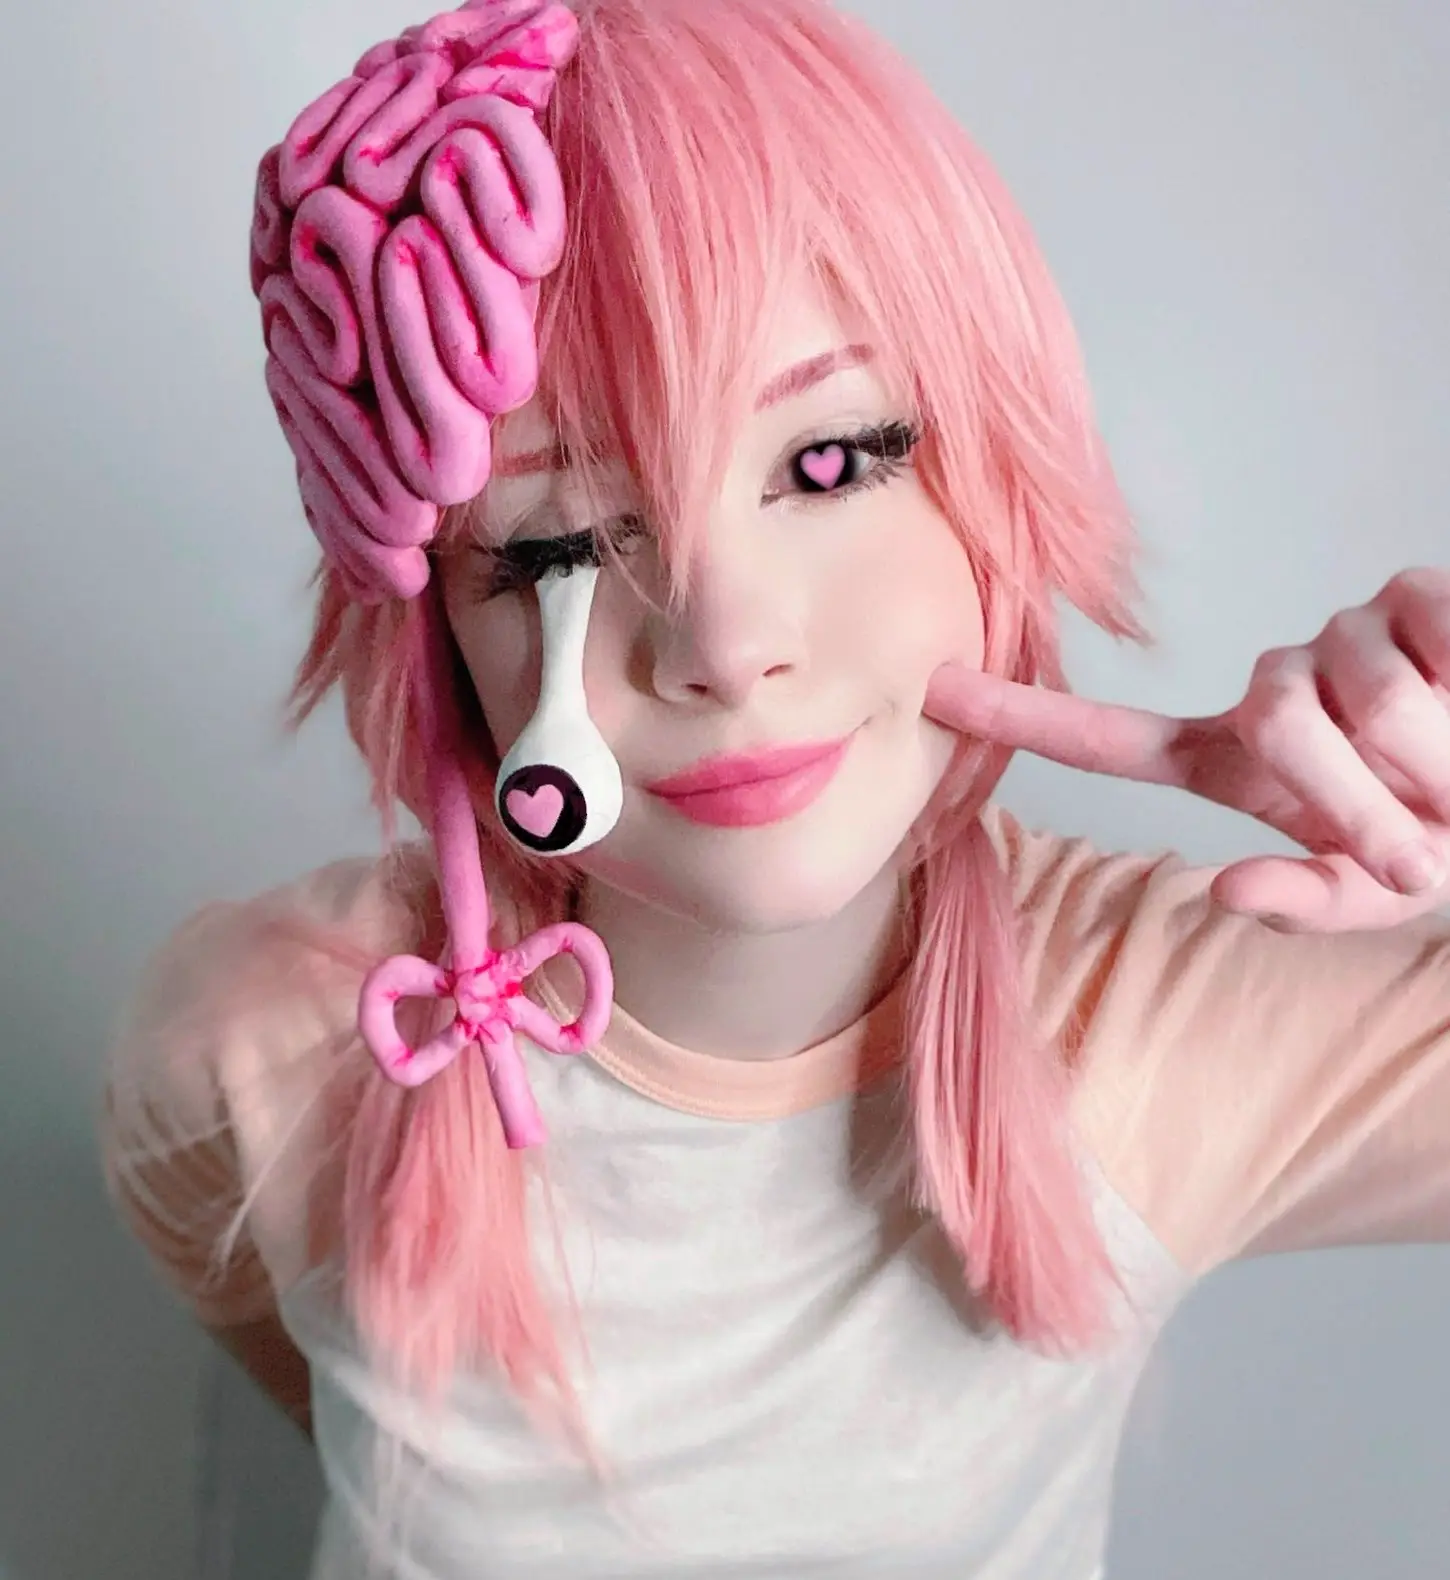 Norafawn: An Insight into Her Cosplaying Journey